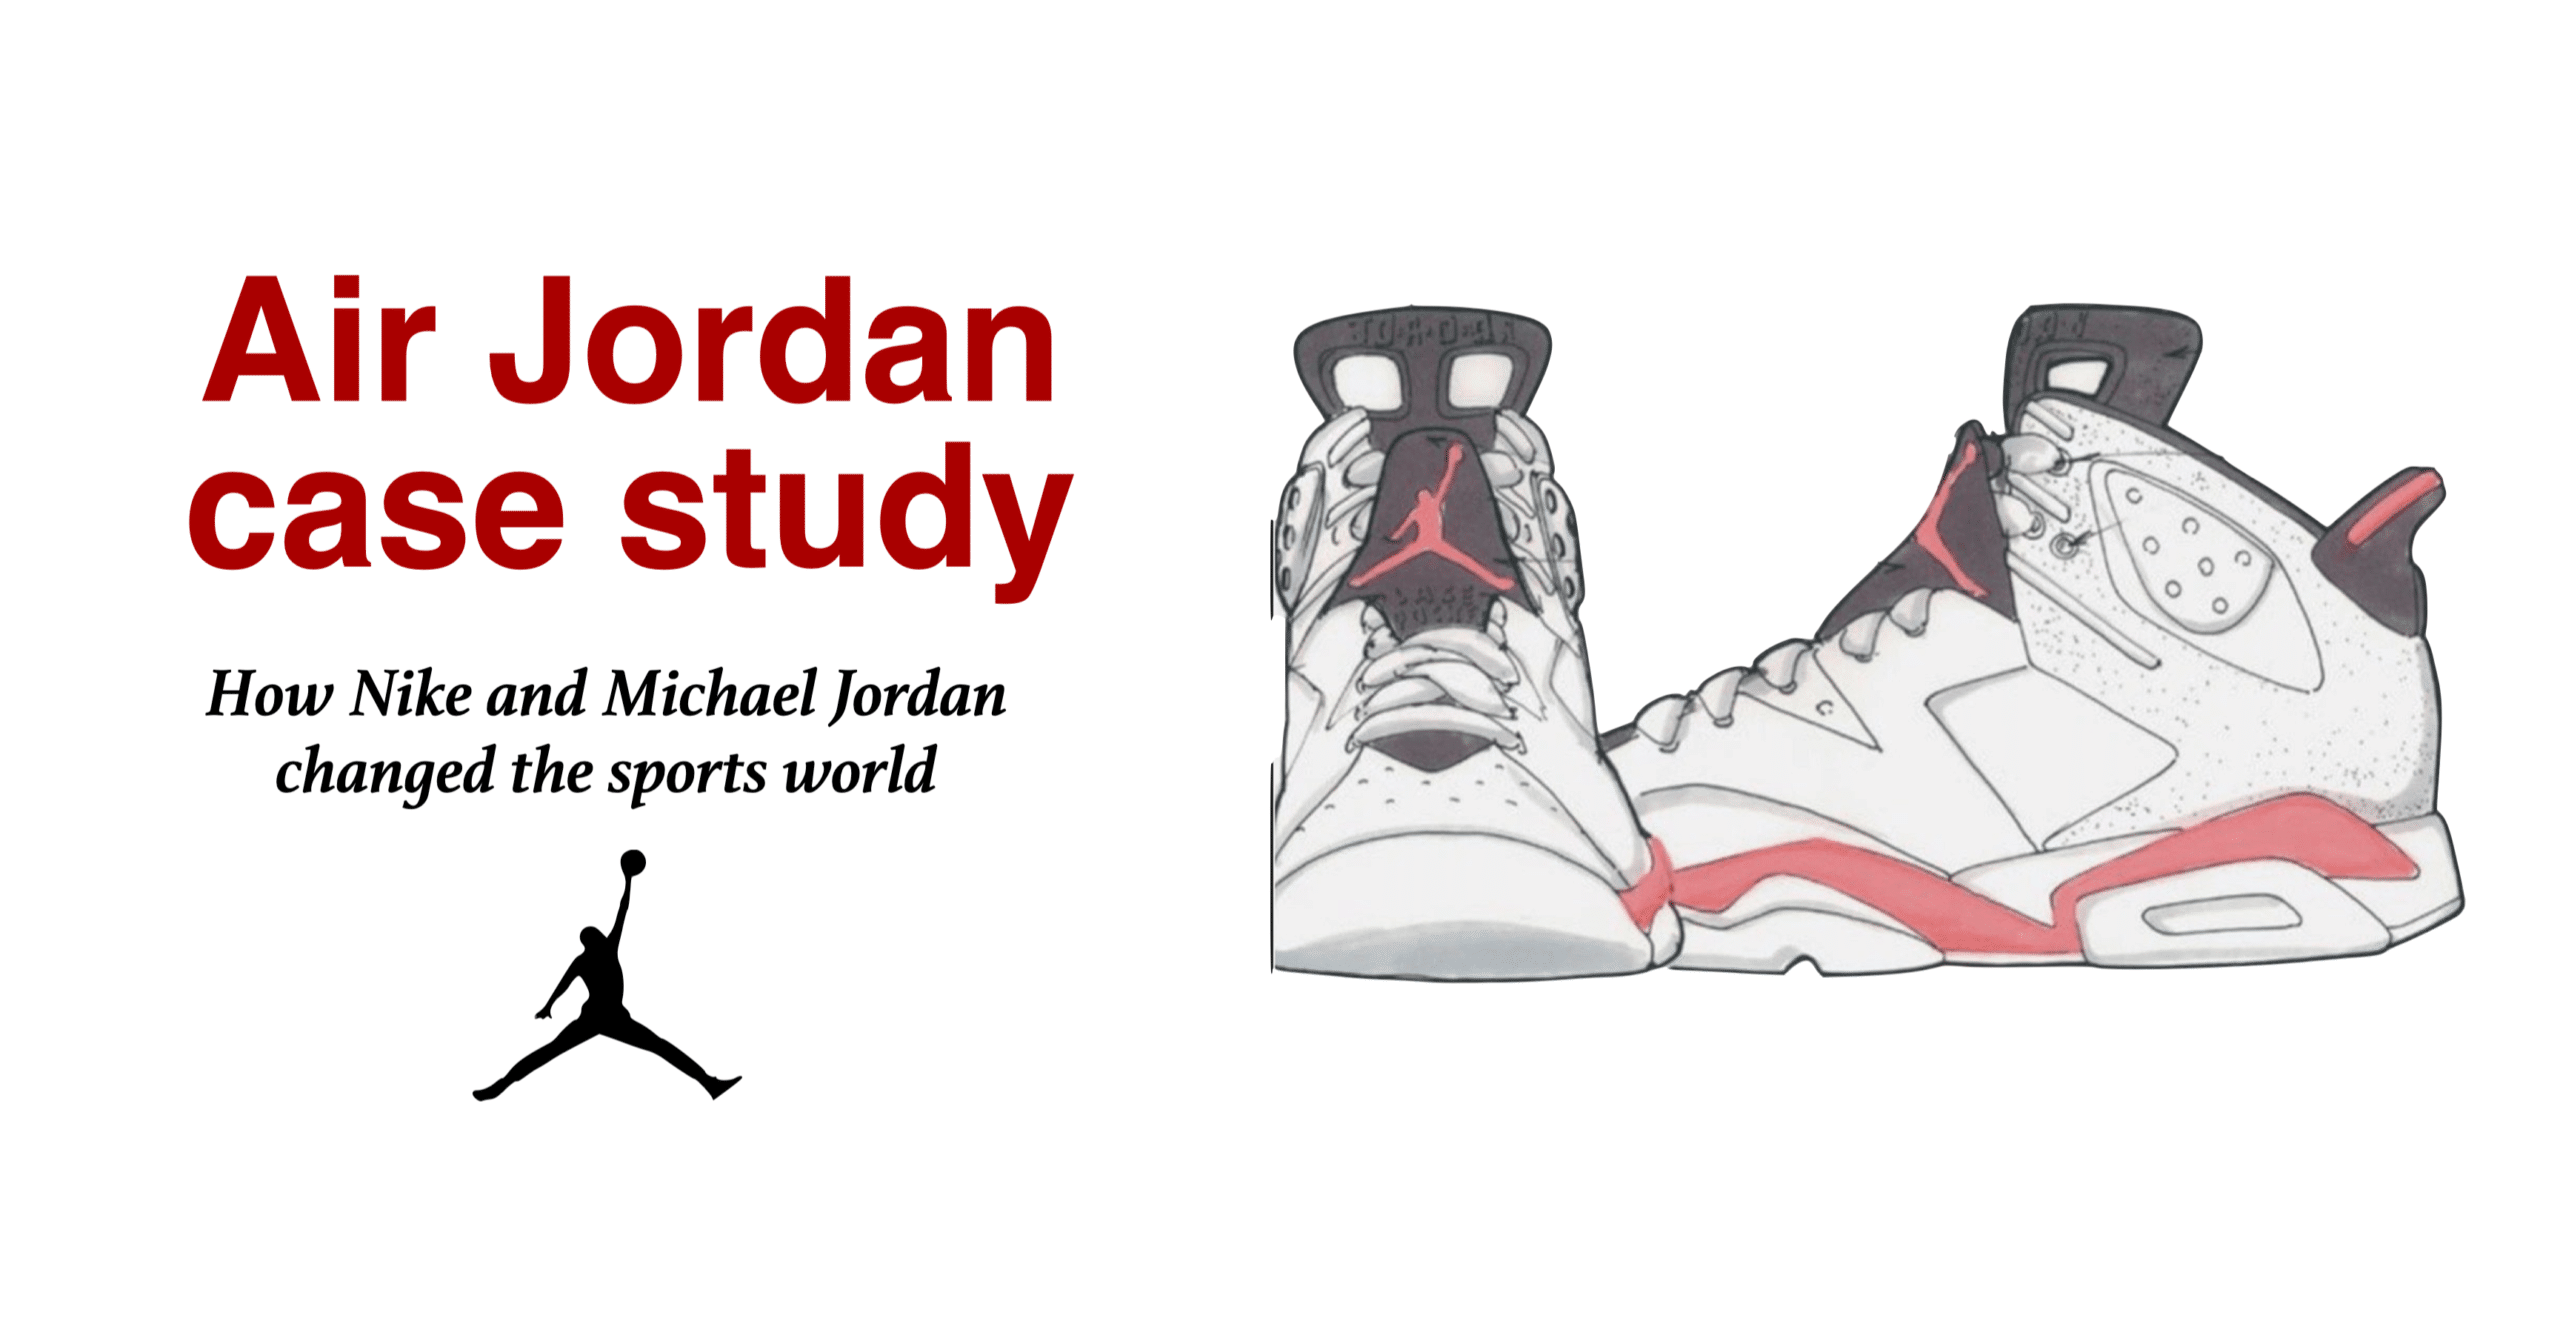 The role of Michael Jordan's shoes brand “Air Jordan” in the rise of Nike  as a shoe giant